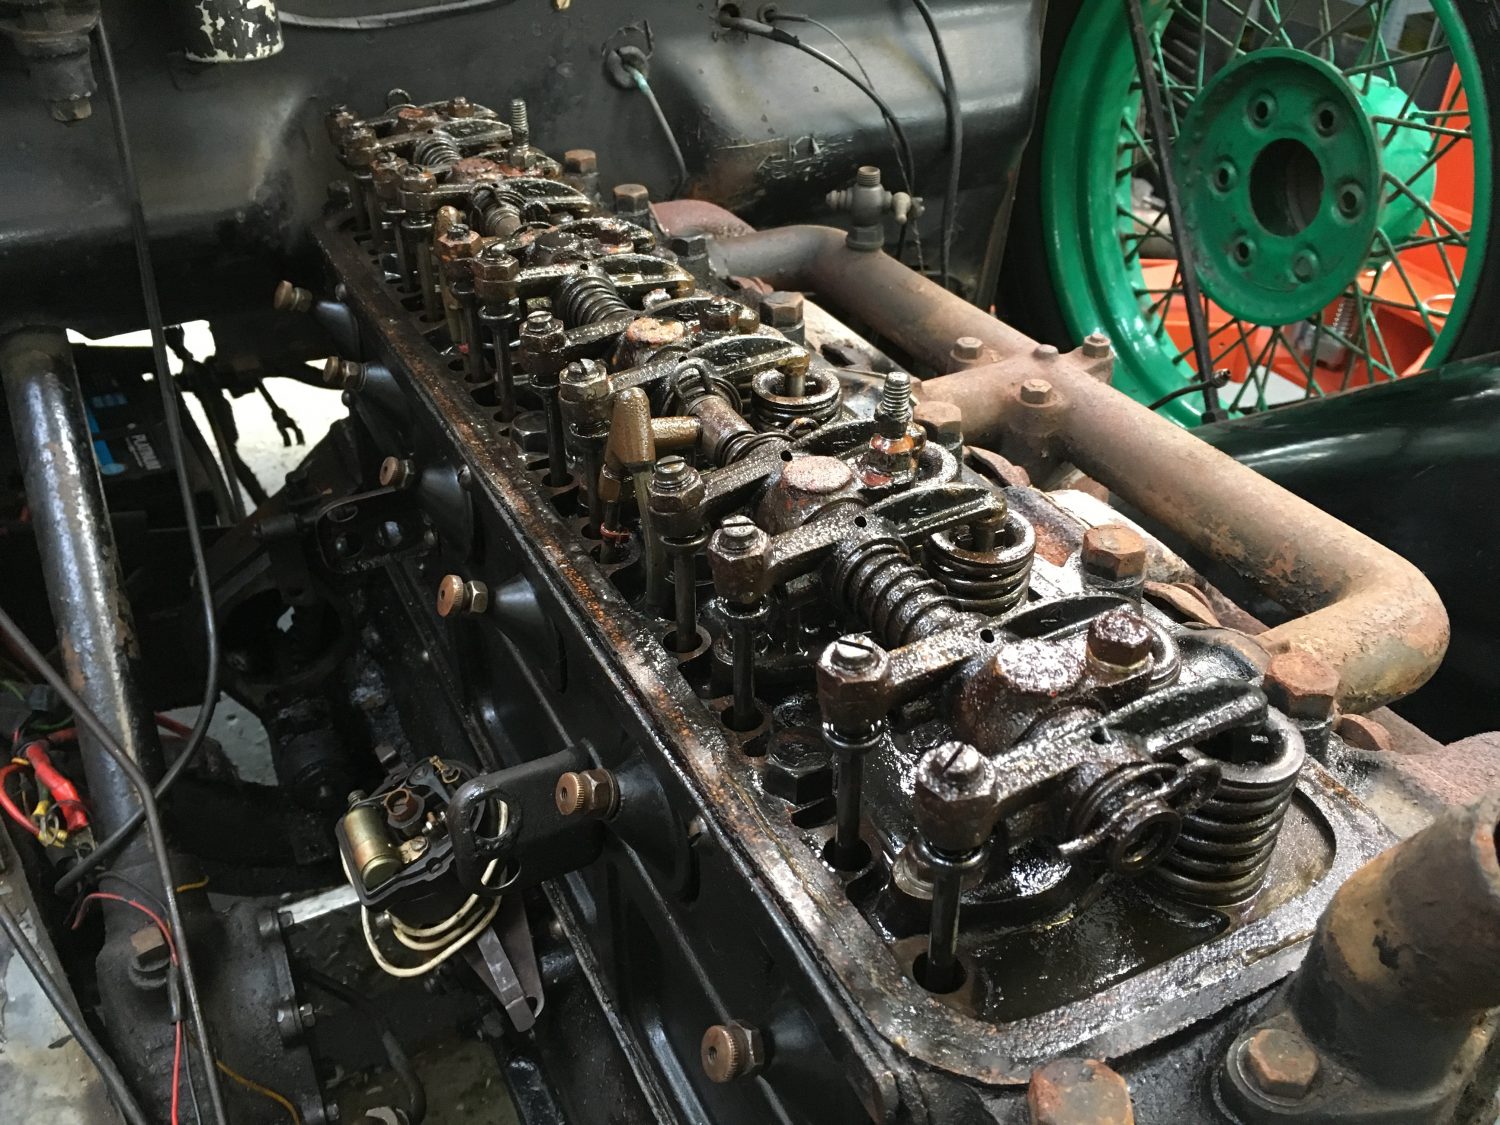 1932 Vauxhall Cadet engine being removed